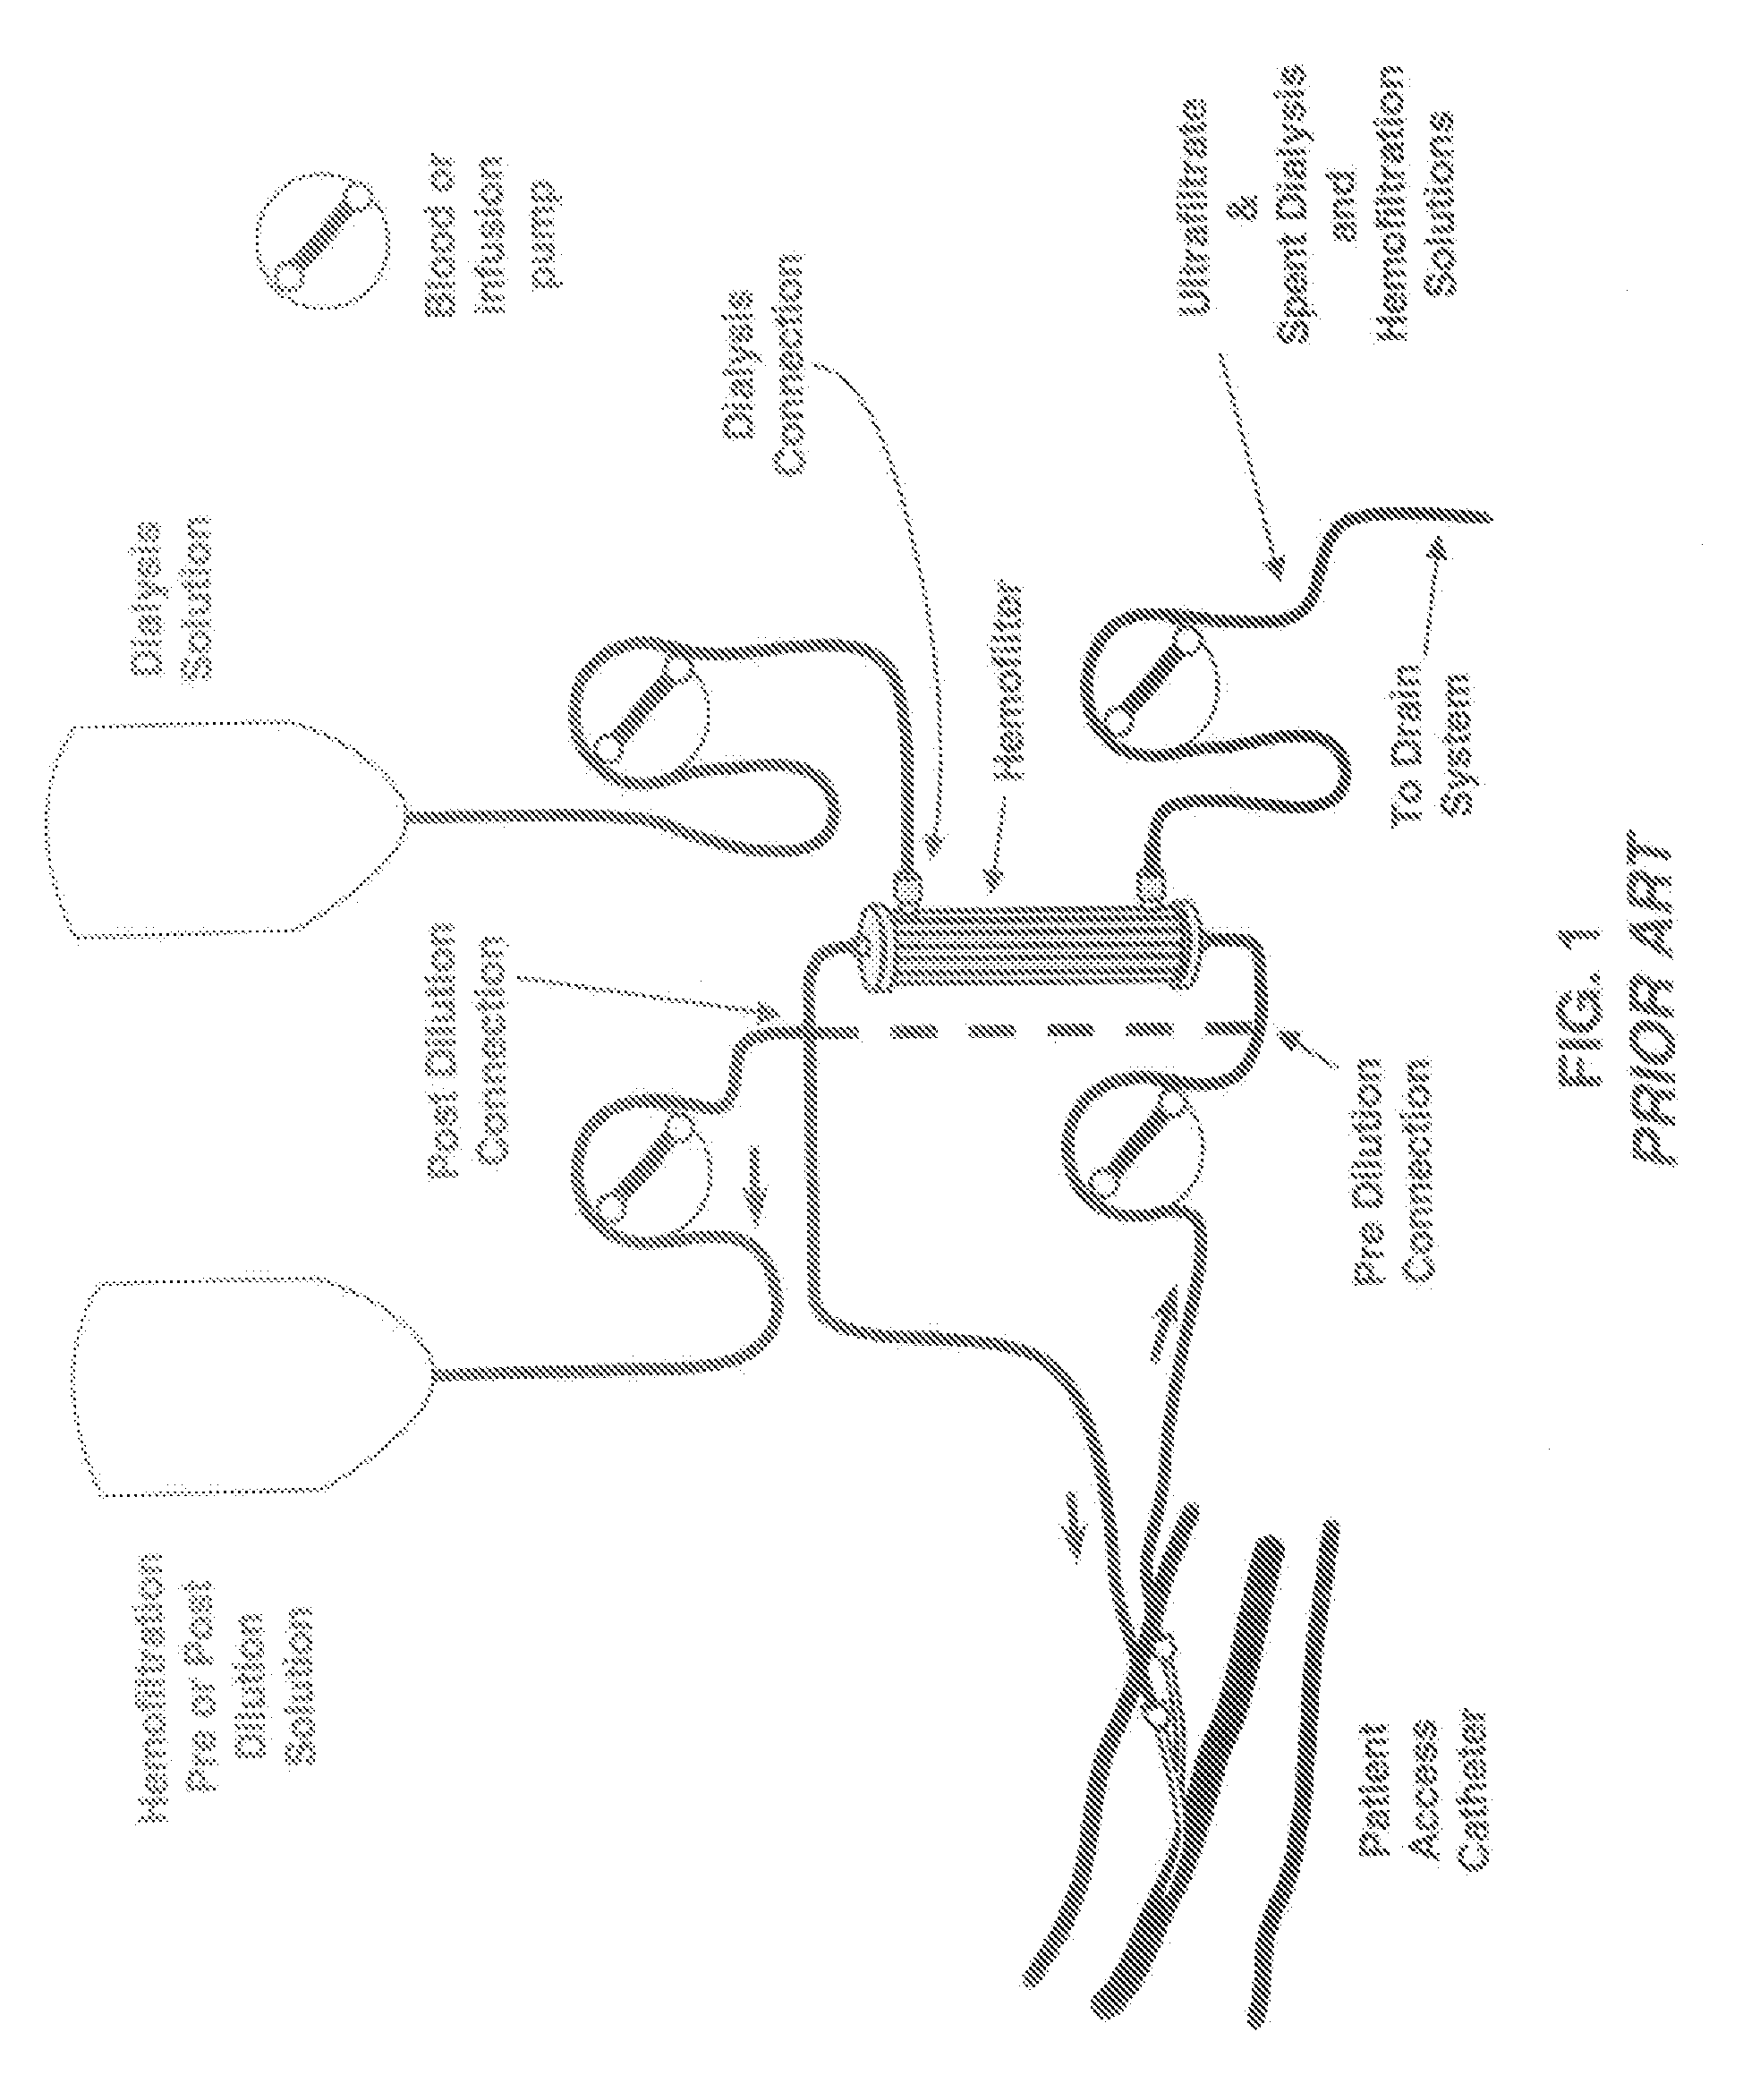 System and method for delivery of regional citrate anticoagulation to extracorporeal blood circuits